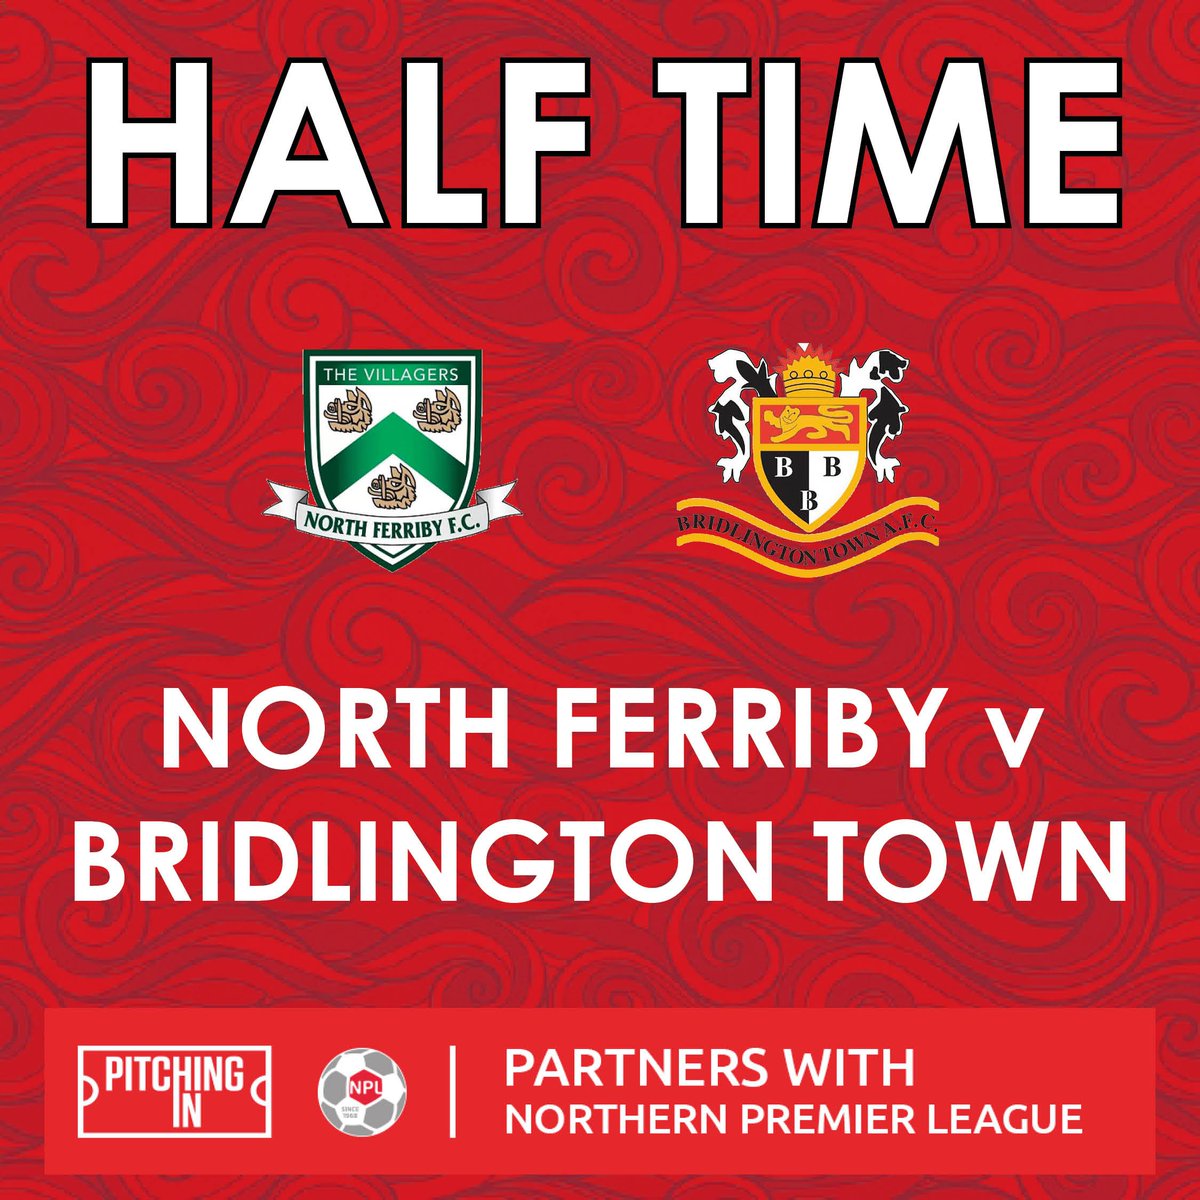 Half time. North Ferriby 0 Bridlington Town 1 Dennison's goal midway through the half sees us in front at the break. Ferriby have had most of the possession but Bridlington have battled hard, defended well and taken their chance. ⚪️🟢 0-1 🔴🔴